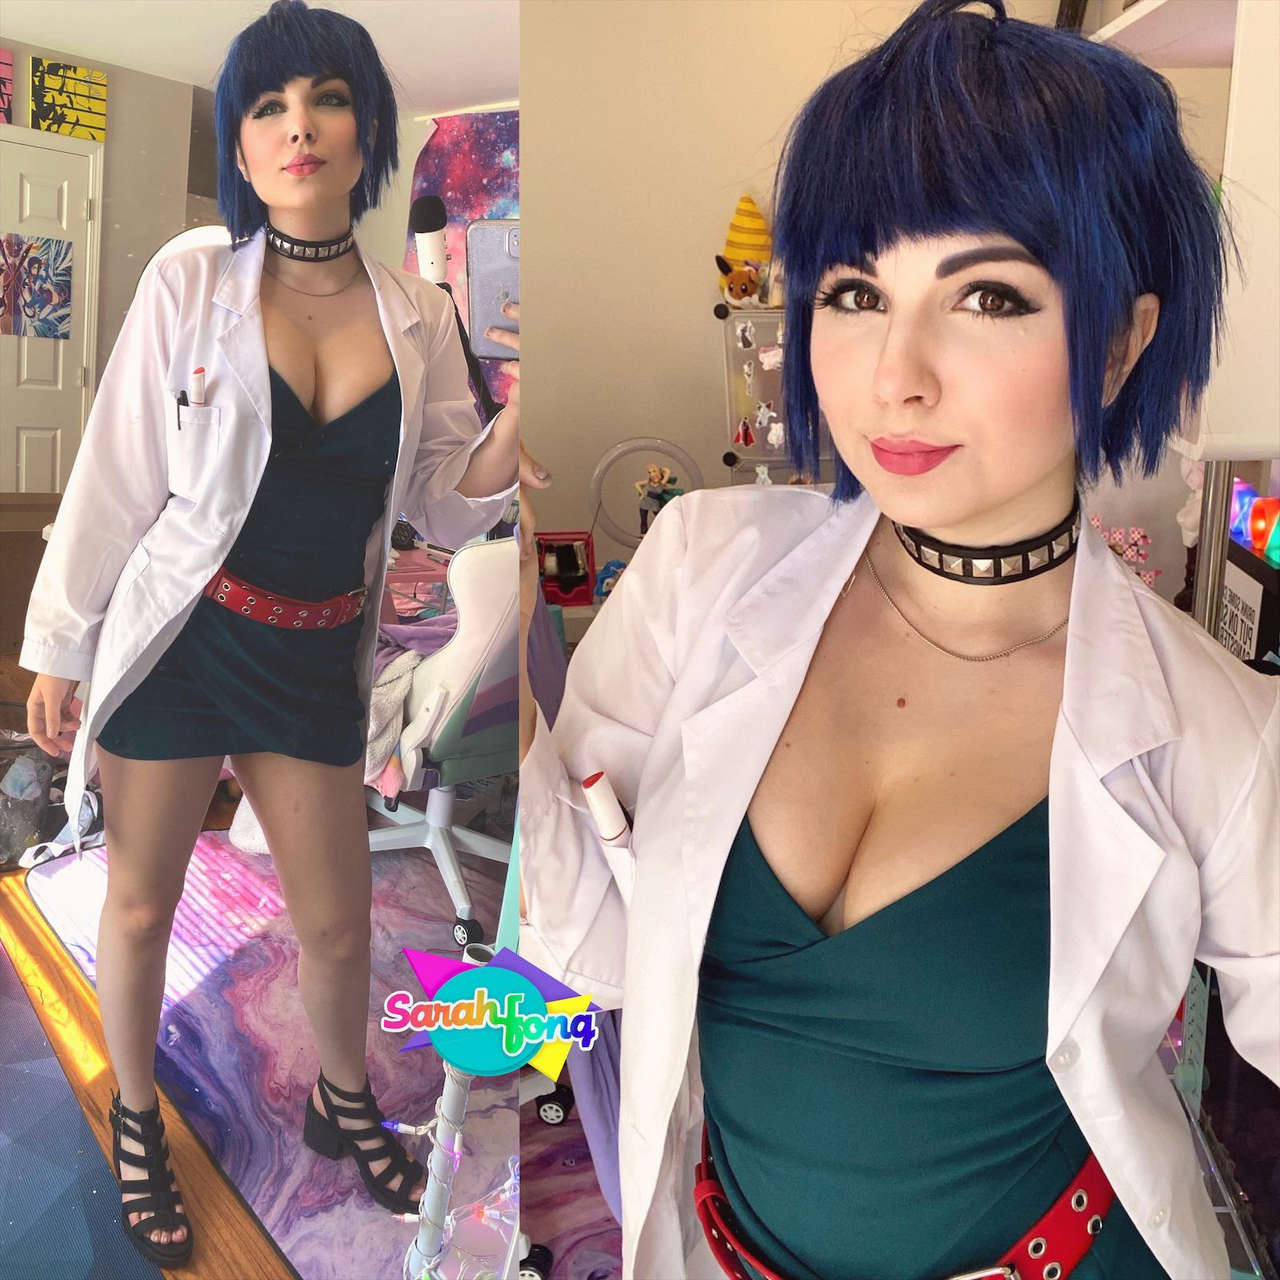 Self Sarah Fong The Doctor Is In Cosplaying Tae Takemi From Persona 